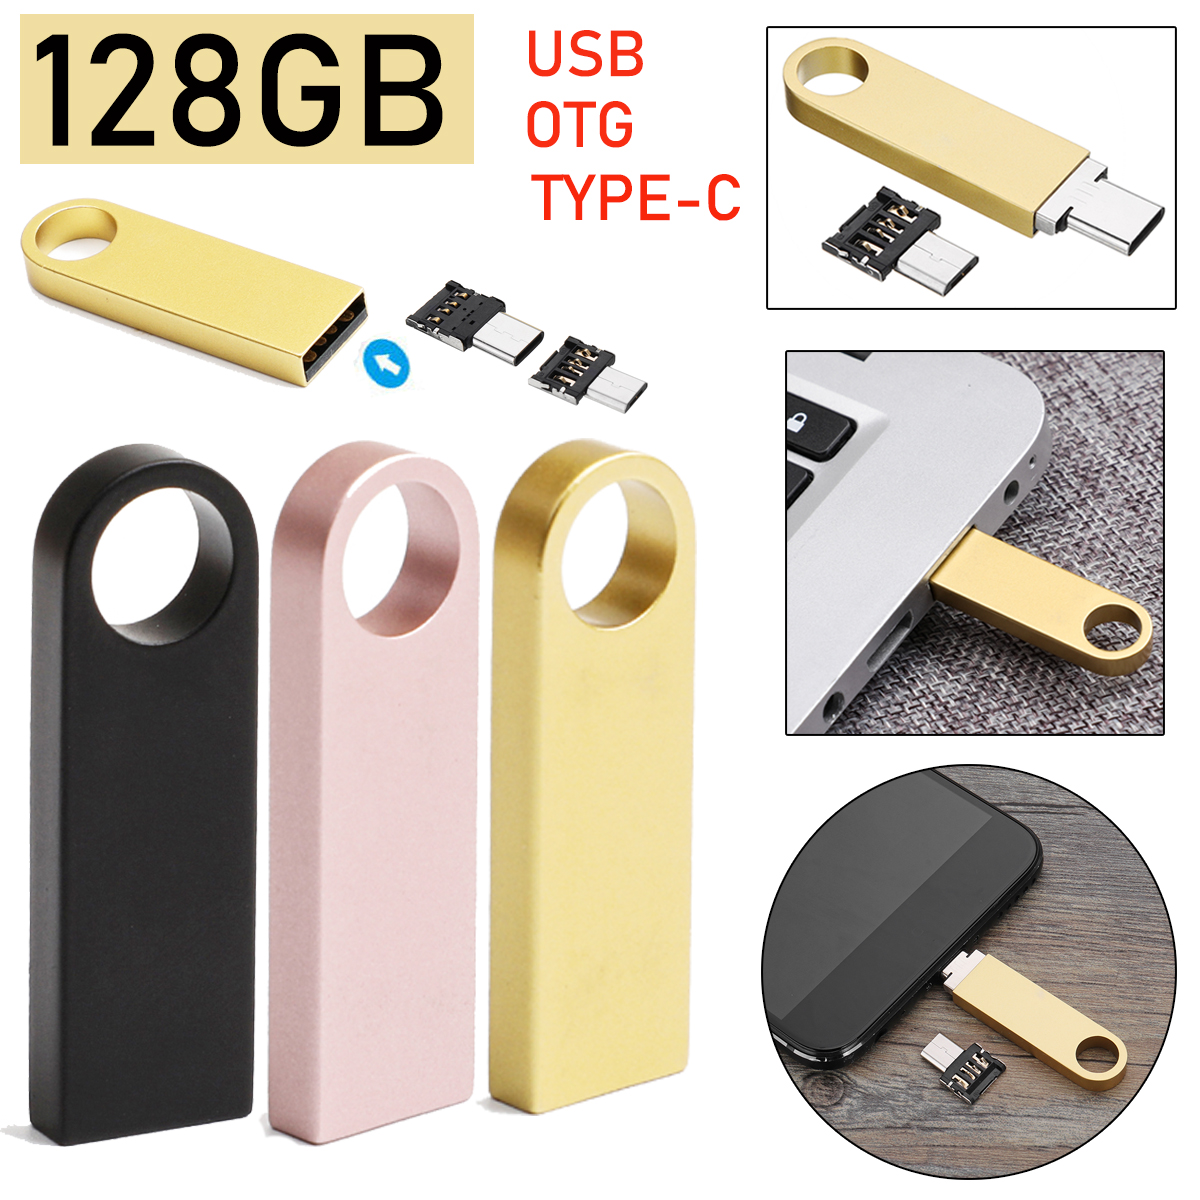 128GB-USB-20-Flash-Drive-With-Type-C-AdapterOTG-Adapter-For-Smart-Phone-Laptop-Notebook-PC-Speaker-1492757